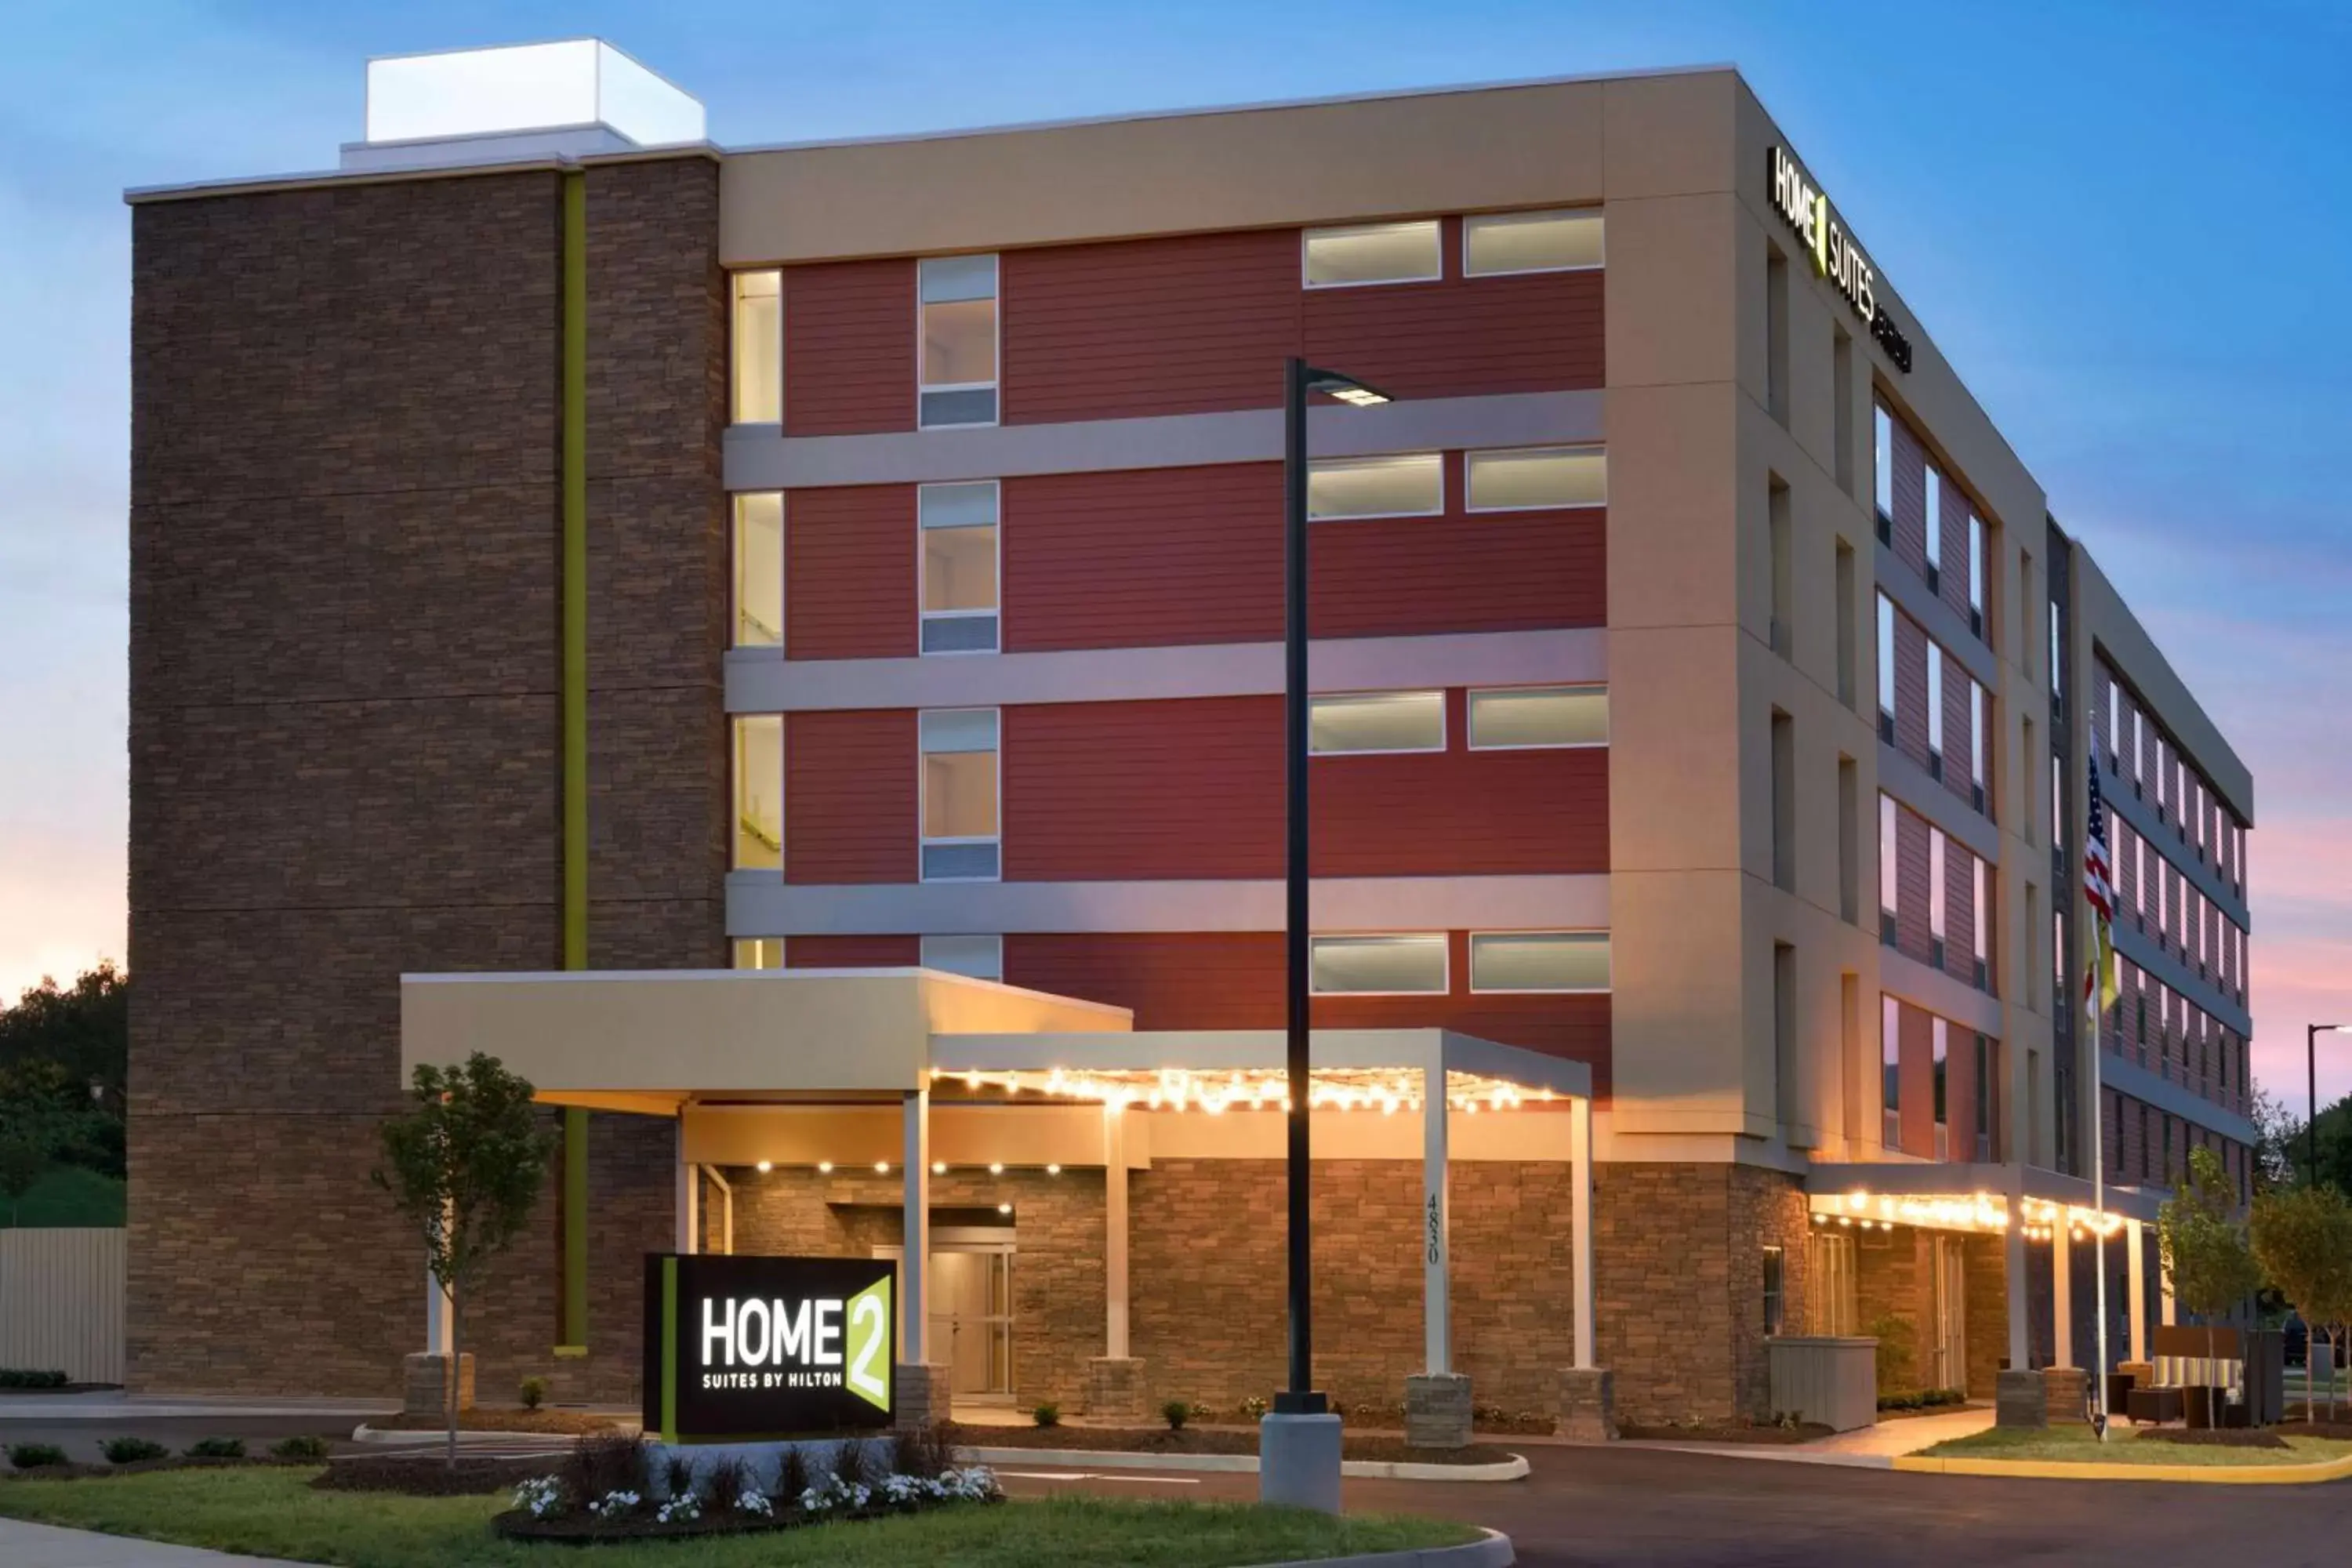 Property Building in Home2 Suites by Hilton Roanoke